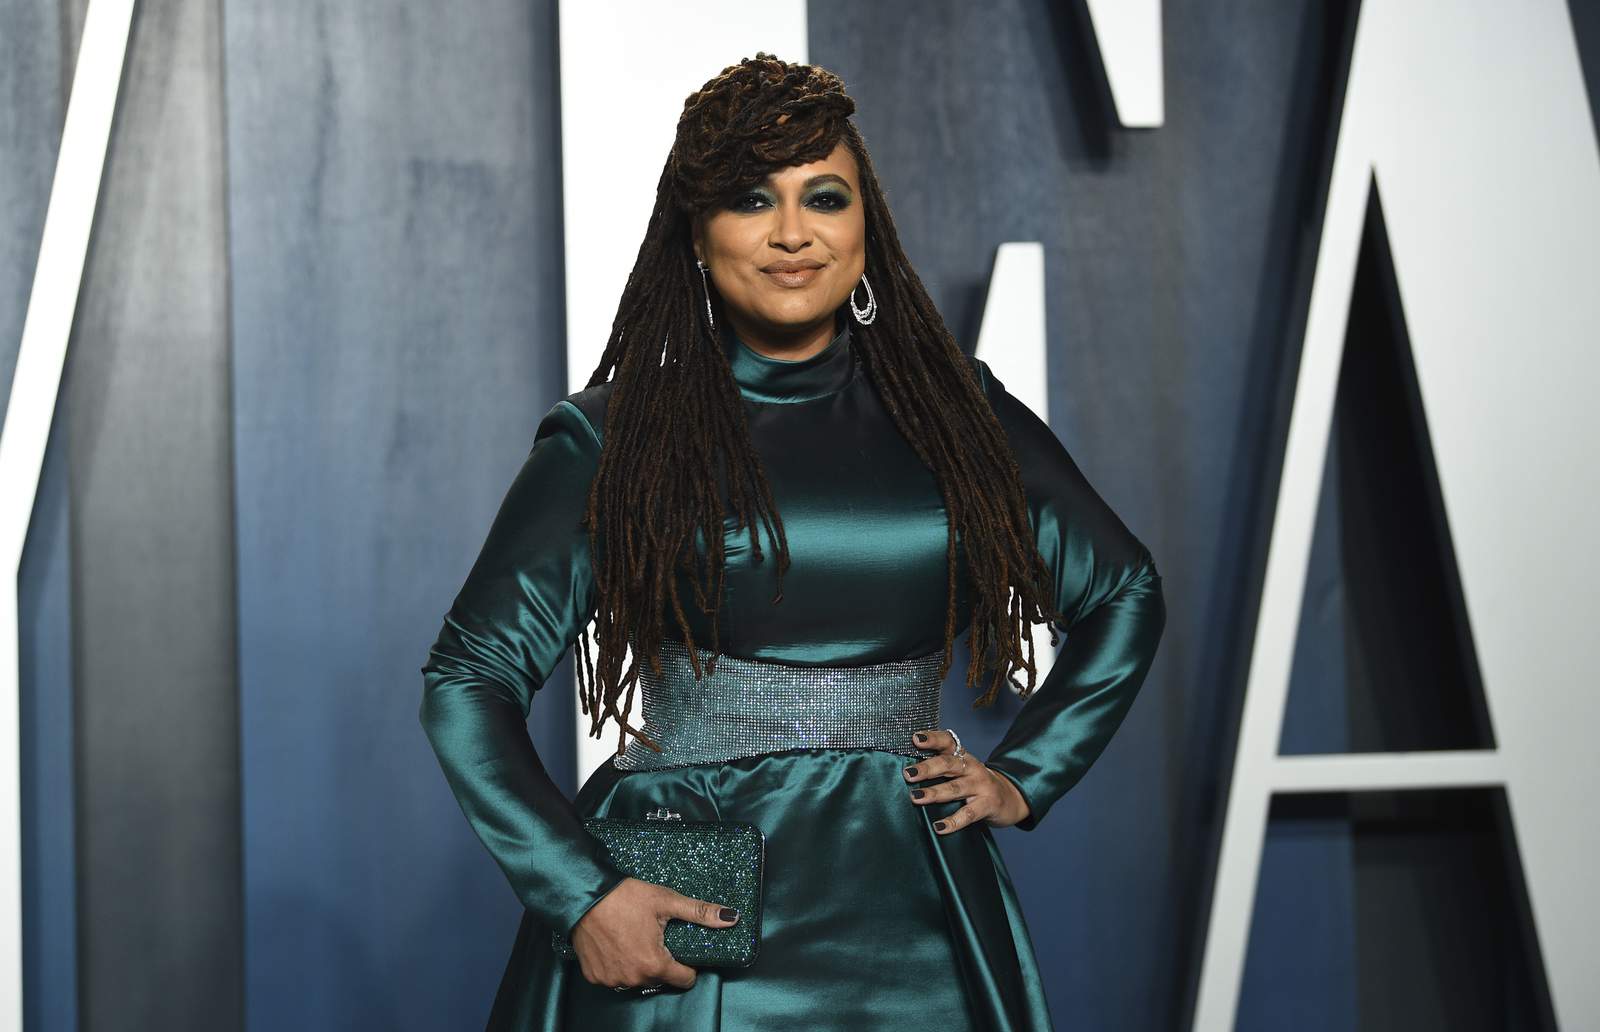 Ava DuVernay joins the film academy's Board of Governors